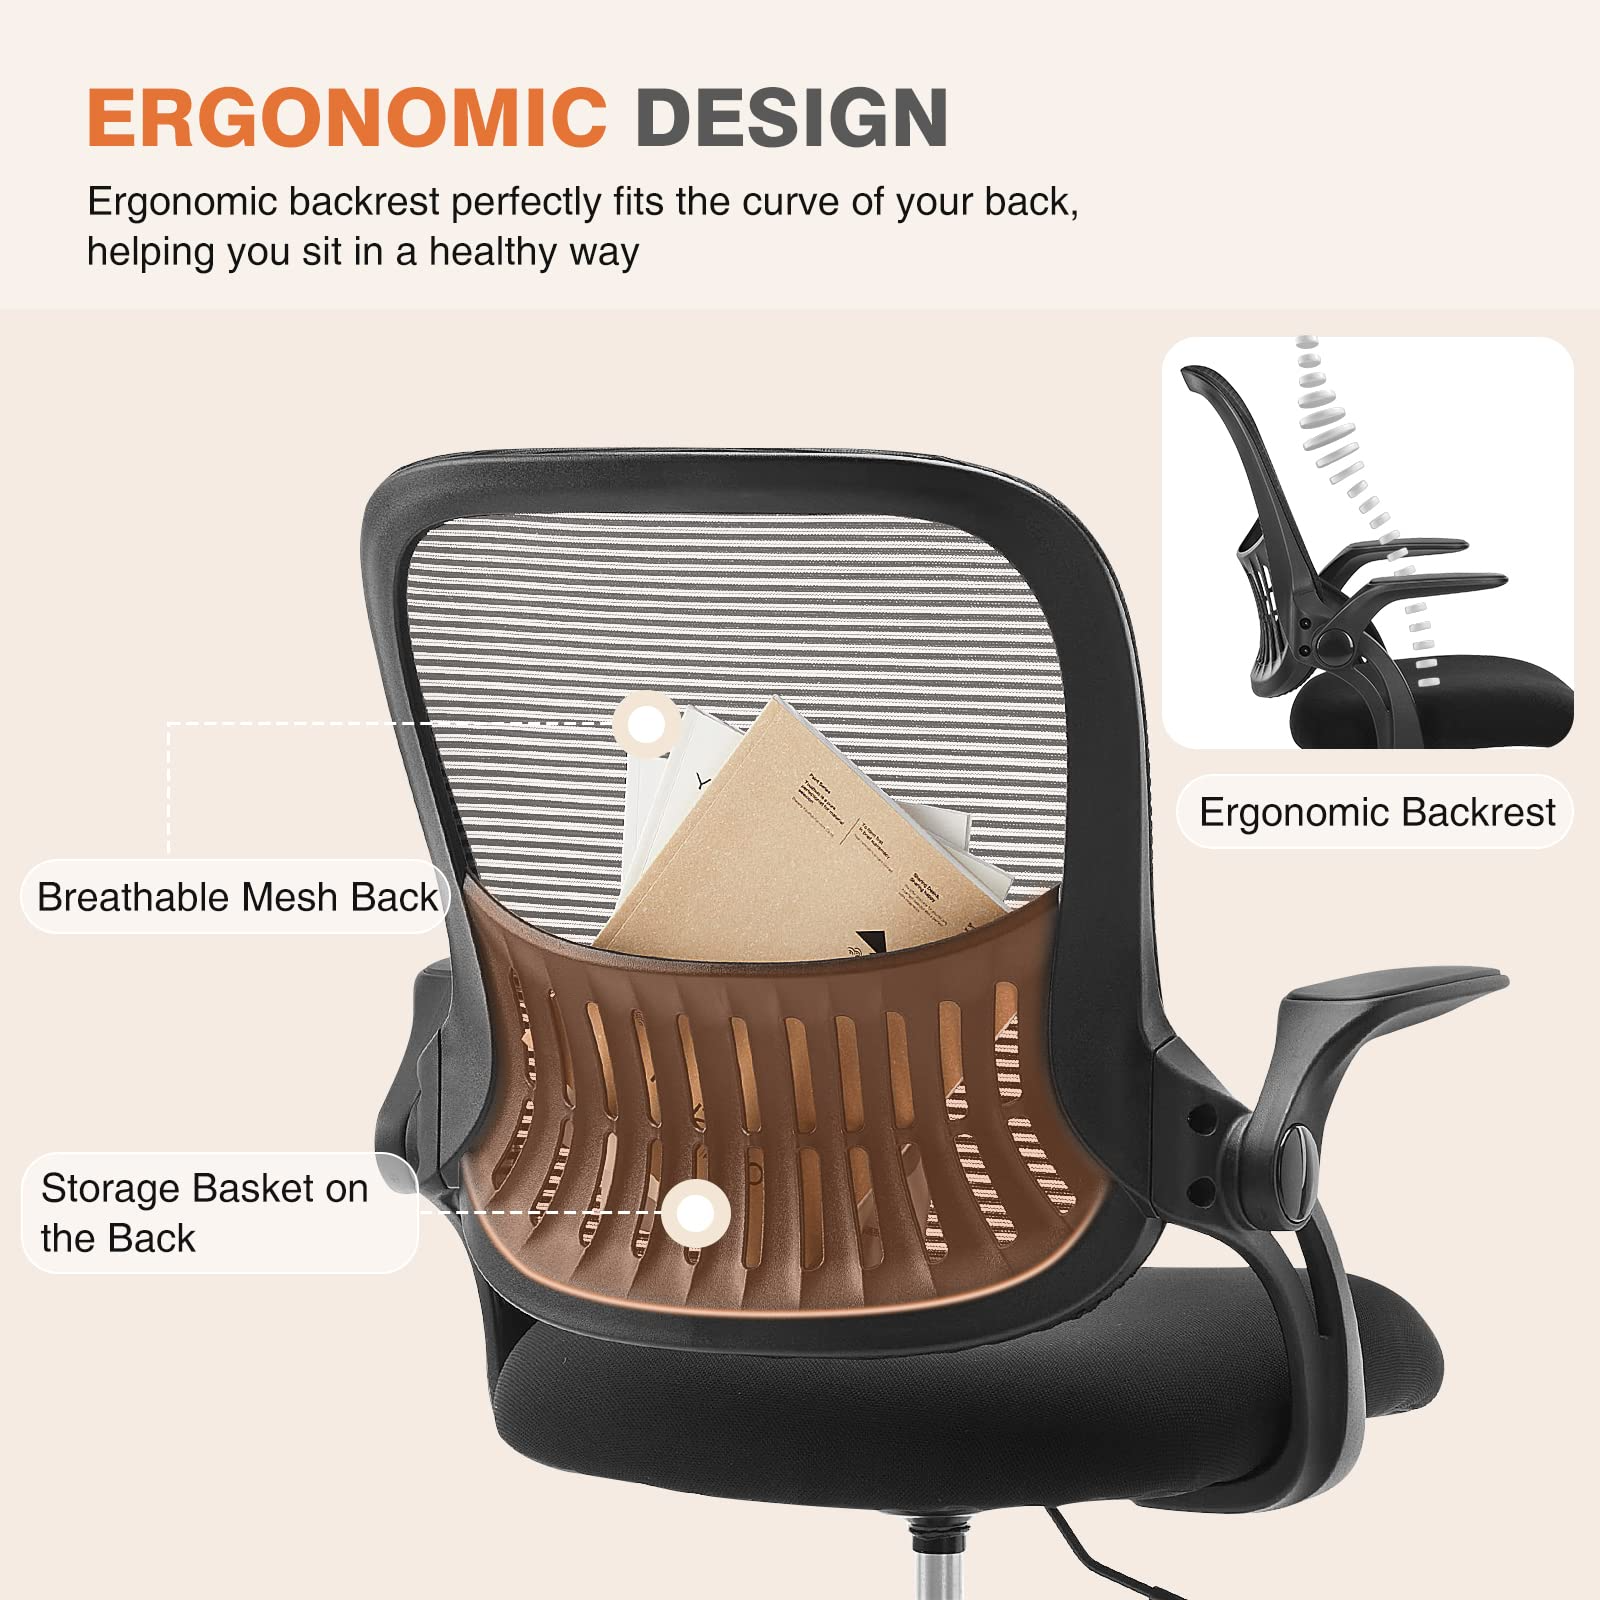 Yoyomax Office Chair, Ergonomic Home Office Desk Chairs, Computer Chair with Comfortable Armrests, Mesh Desk Chairs with Wheels, Mid-Back Task Chair with Lumbar Support - image 2 of 9